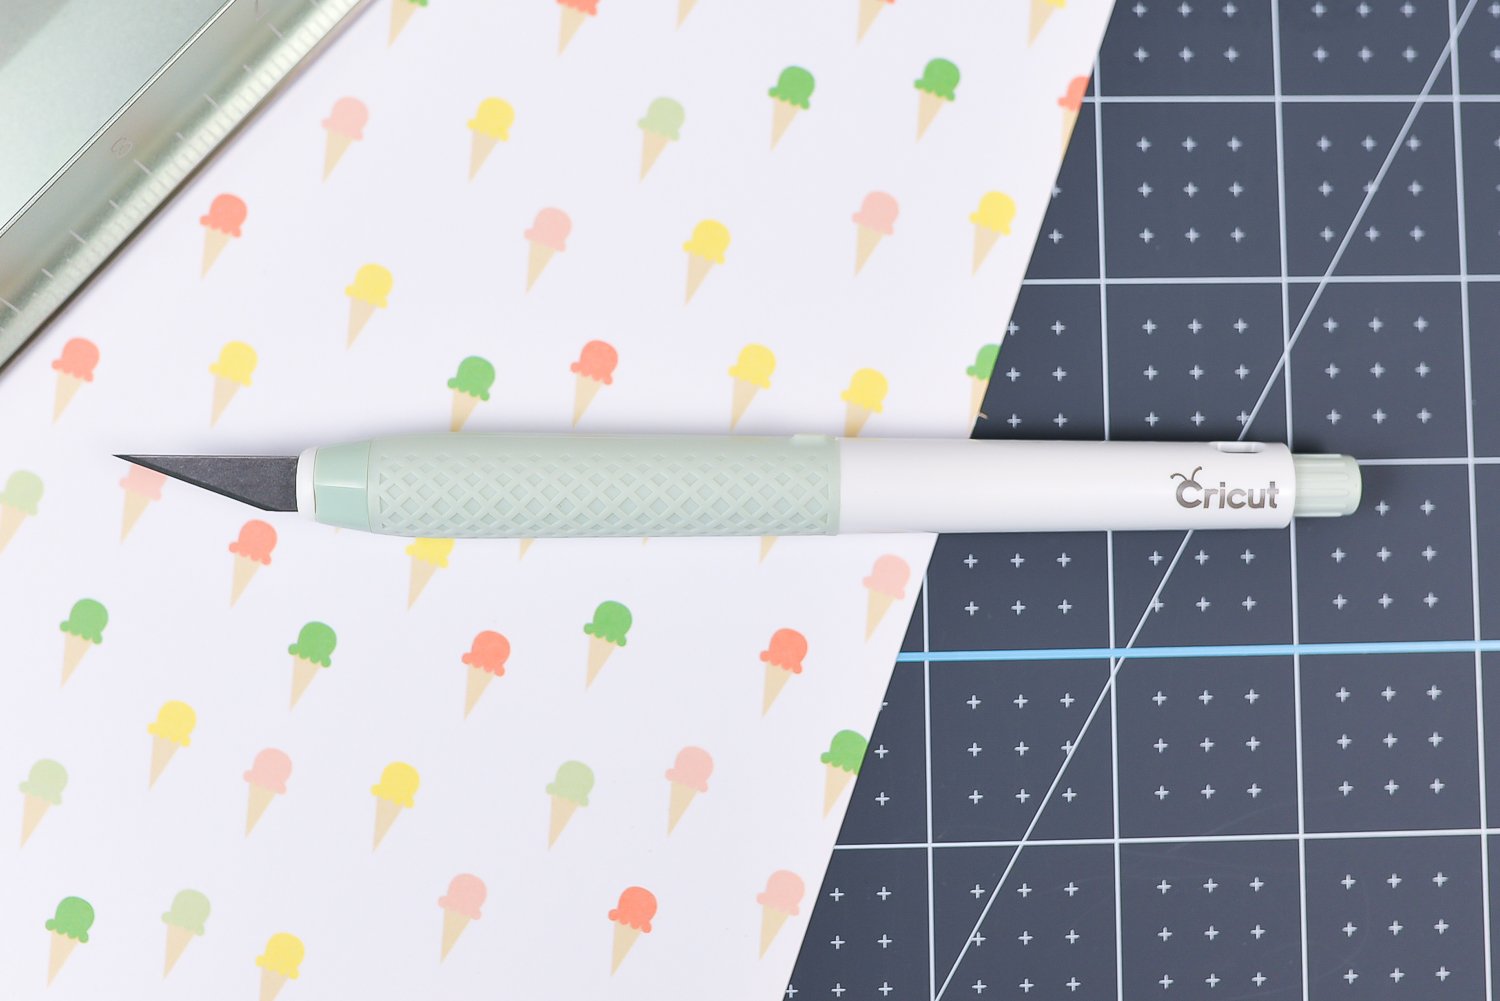 Close up of the Cricut True Control Knife, a cutting ruler and a piece of fabric on top of the Cricut self-healing mat